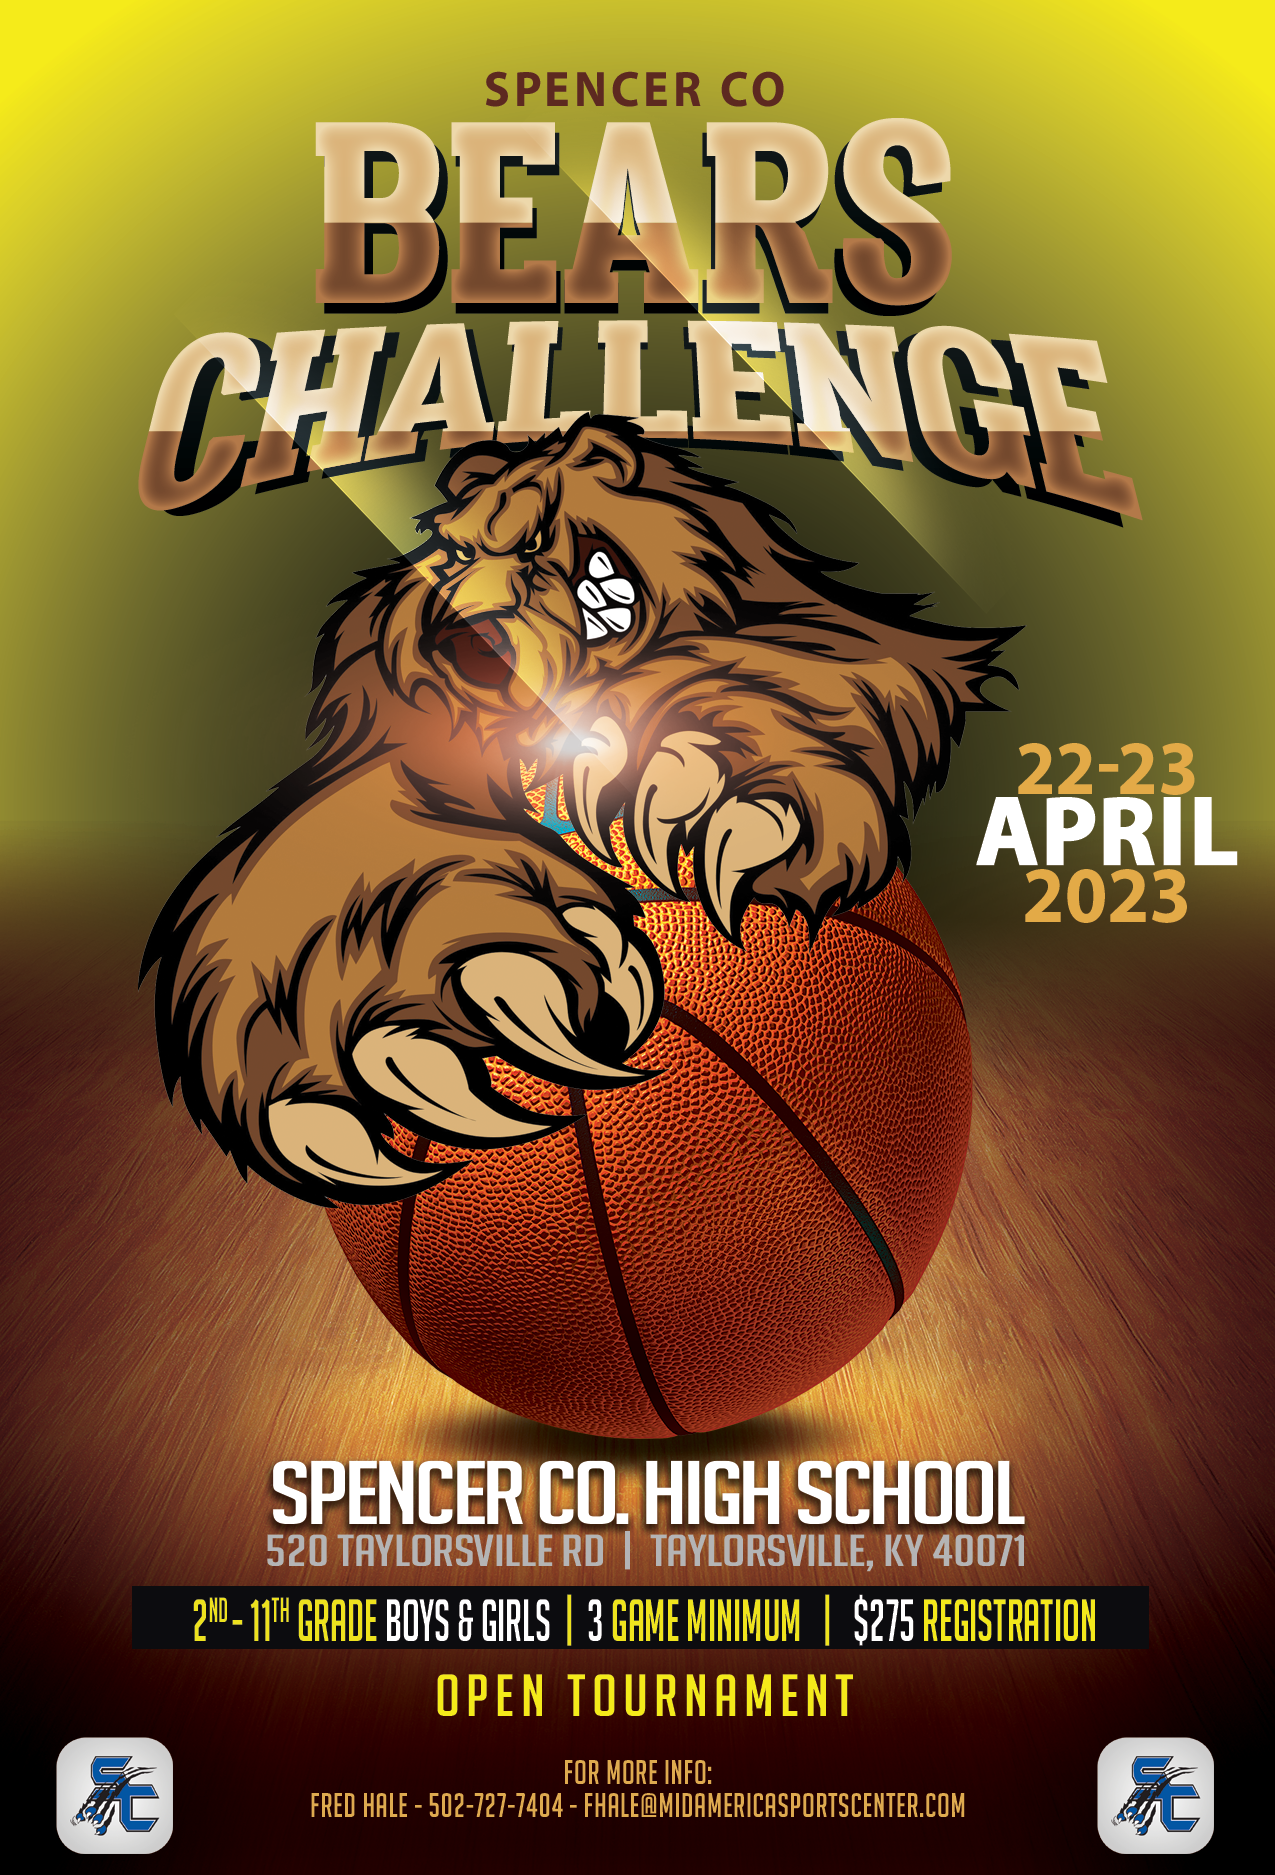 <strong><span style="font-size: 12pt; background-color: #ffffff;"><span style="color: #ff6600;">Spencer Co. Bears Challenge<br />April 22-23, 2023<br /><a href="http://www.midwestbballtournaments.com/ViewEvent.aspx?EID=1027">Click Here for Details</a></span></span></strong>